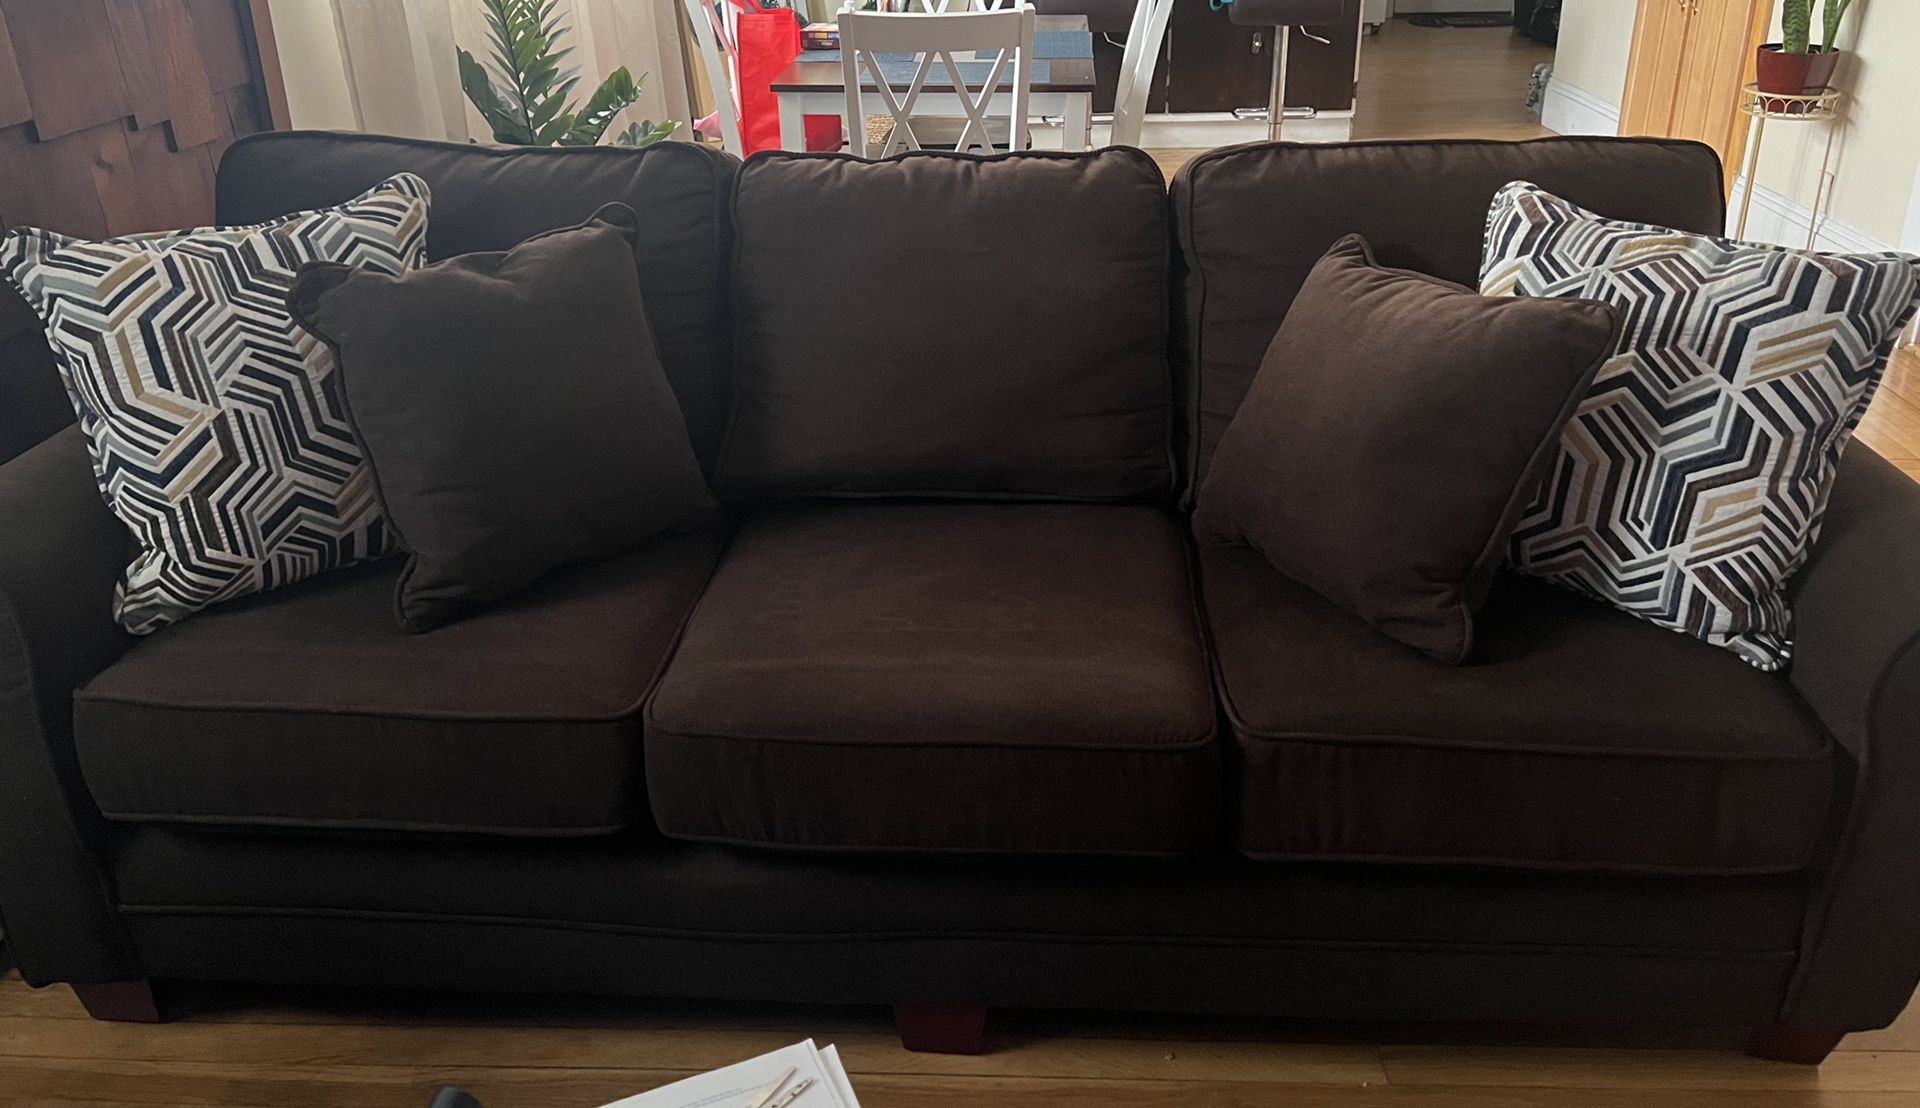 Loveseat And Chair Sofa Set Color Brown Like New 